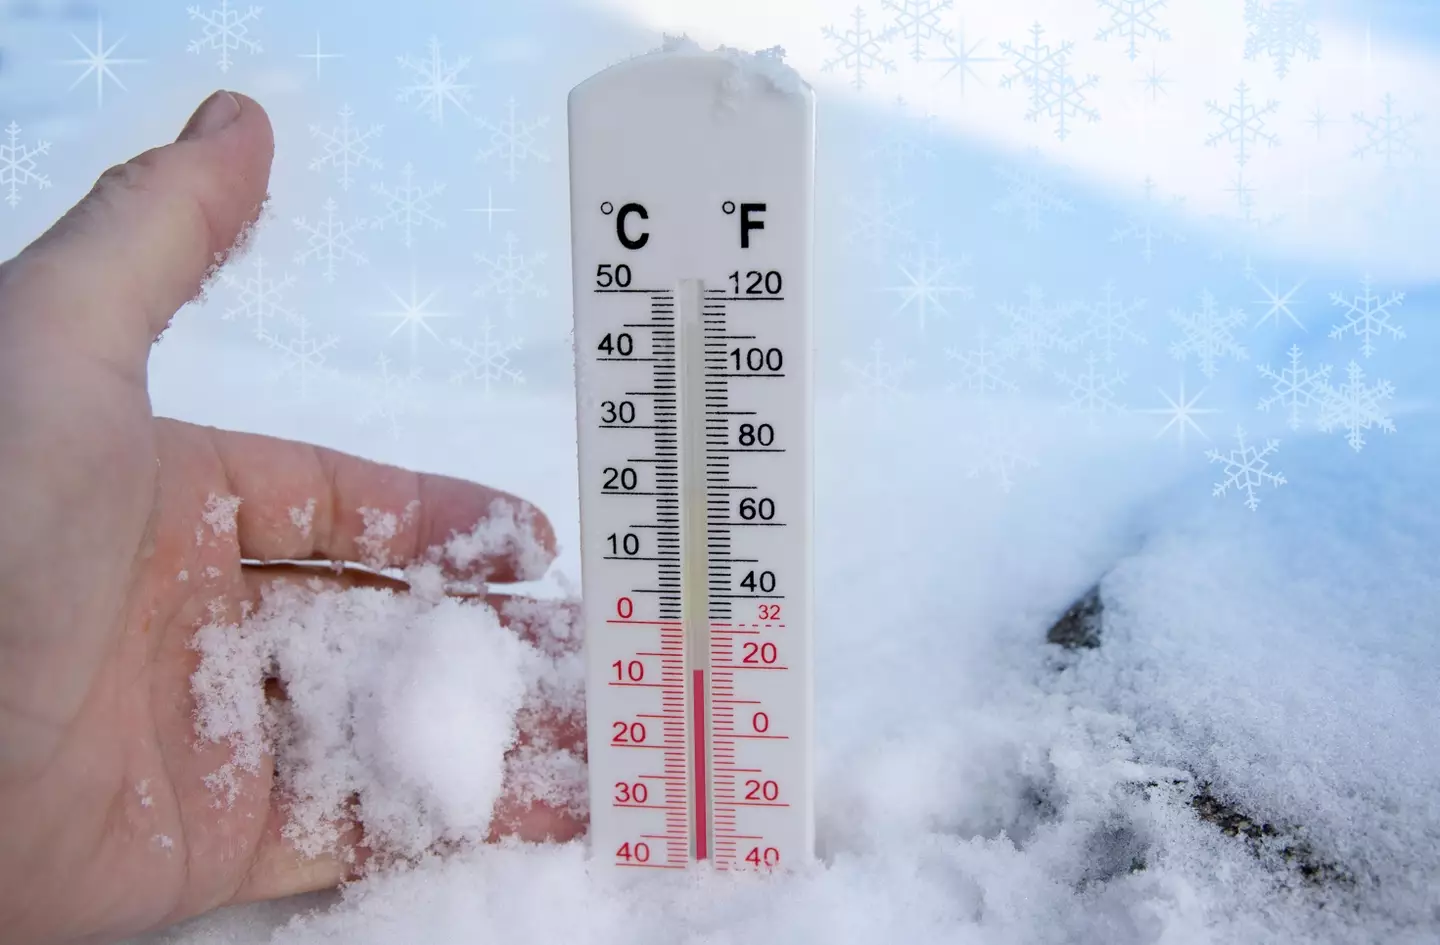 There are guidelines on the minimum temperature your workplace should be.